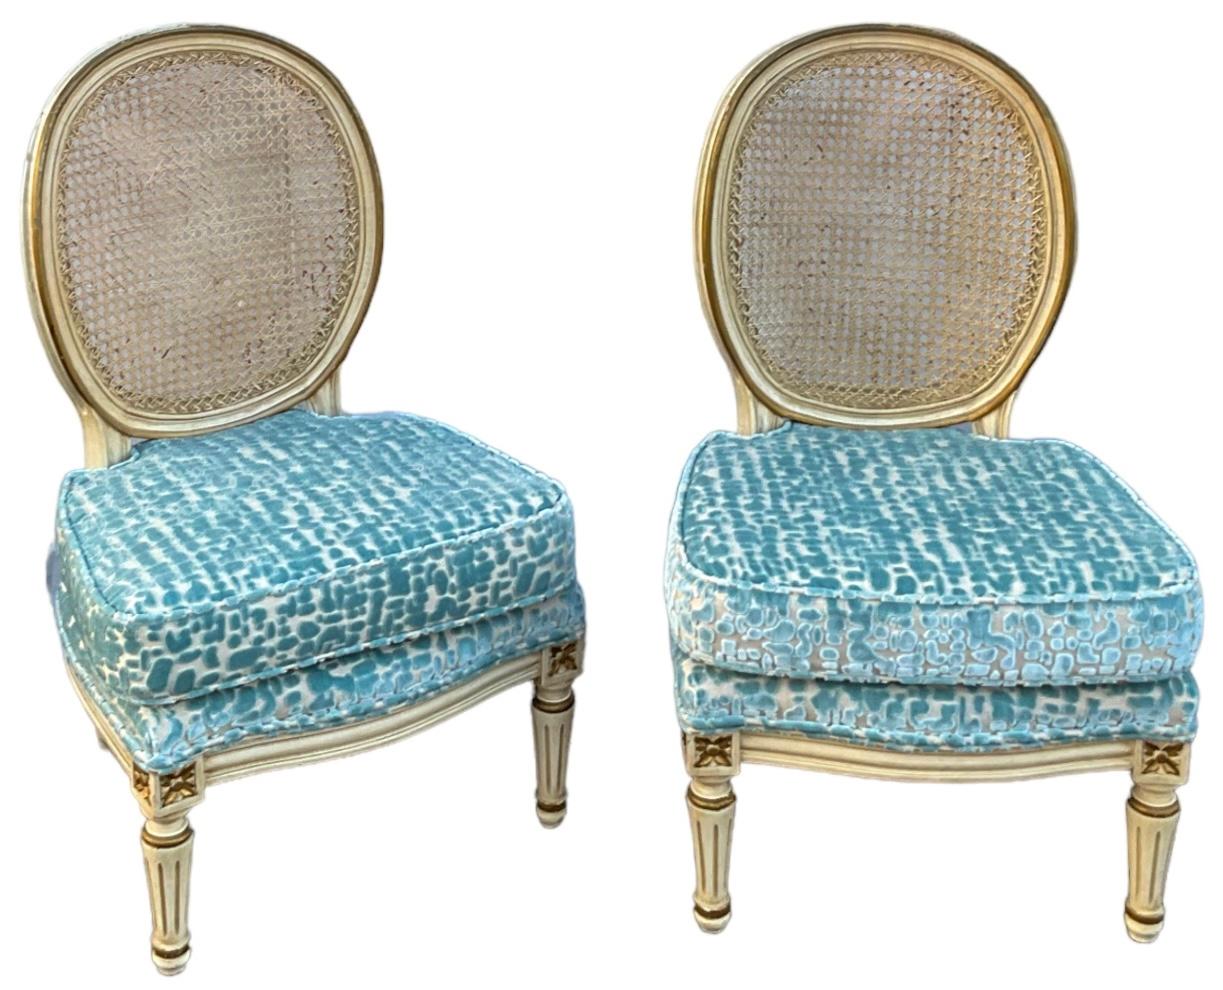 Upholstery Hollywood Regency Era French Style Painted Slipper Chairs In Cut Velvet -Pair